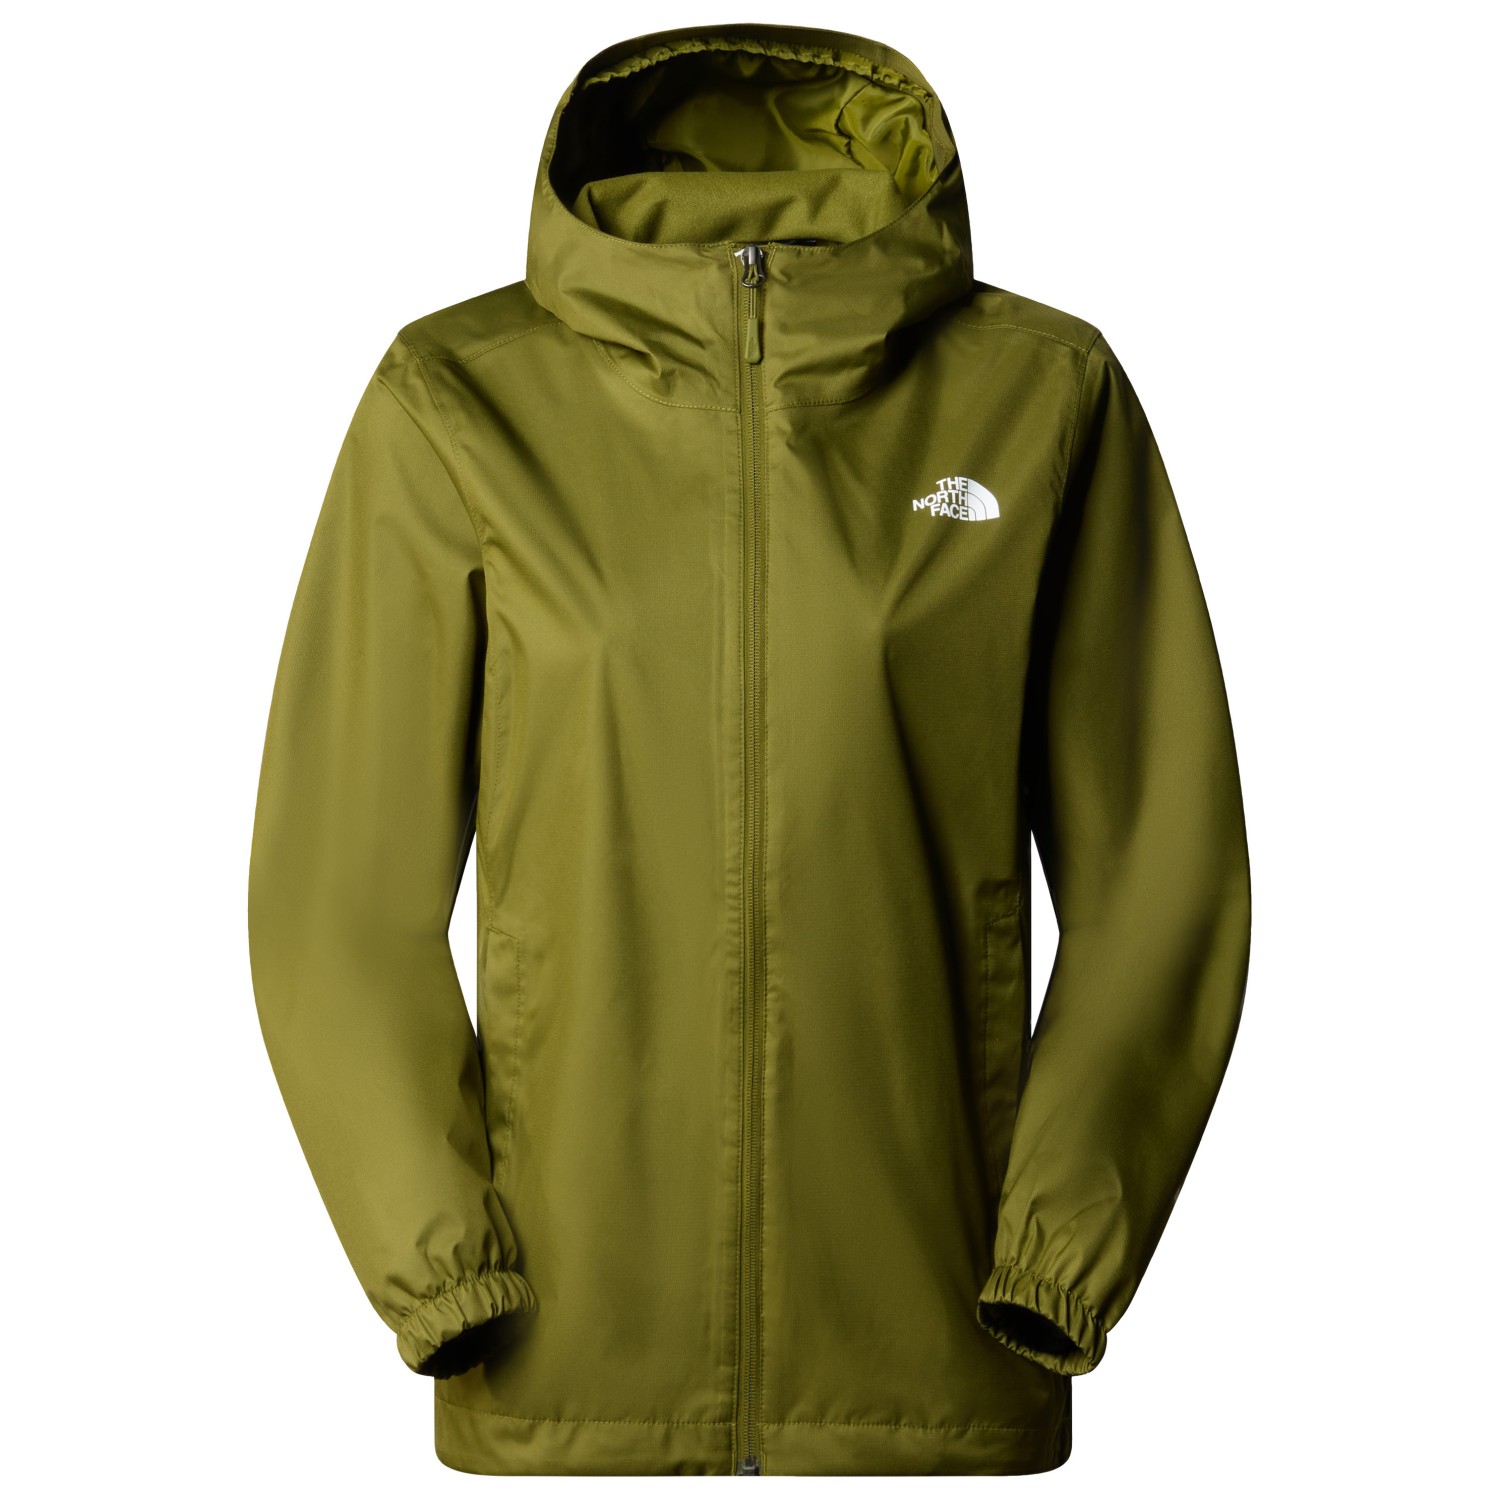 Дождевик The North Face Women's Quest, цвет Forest Olive